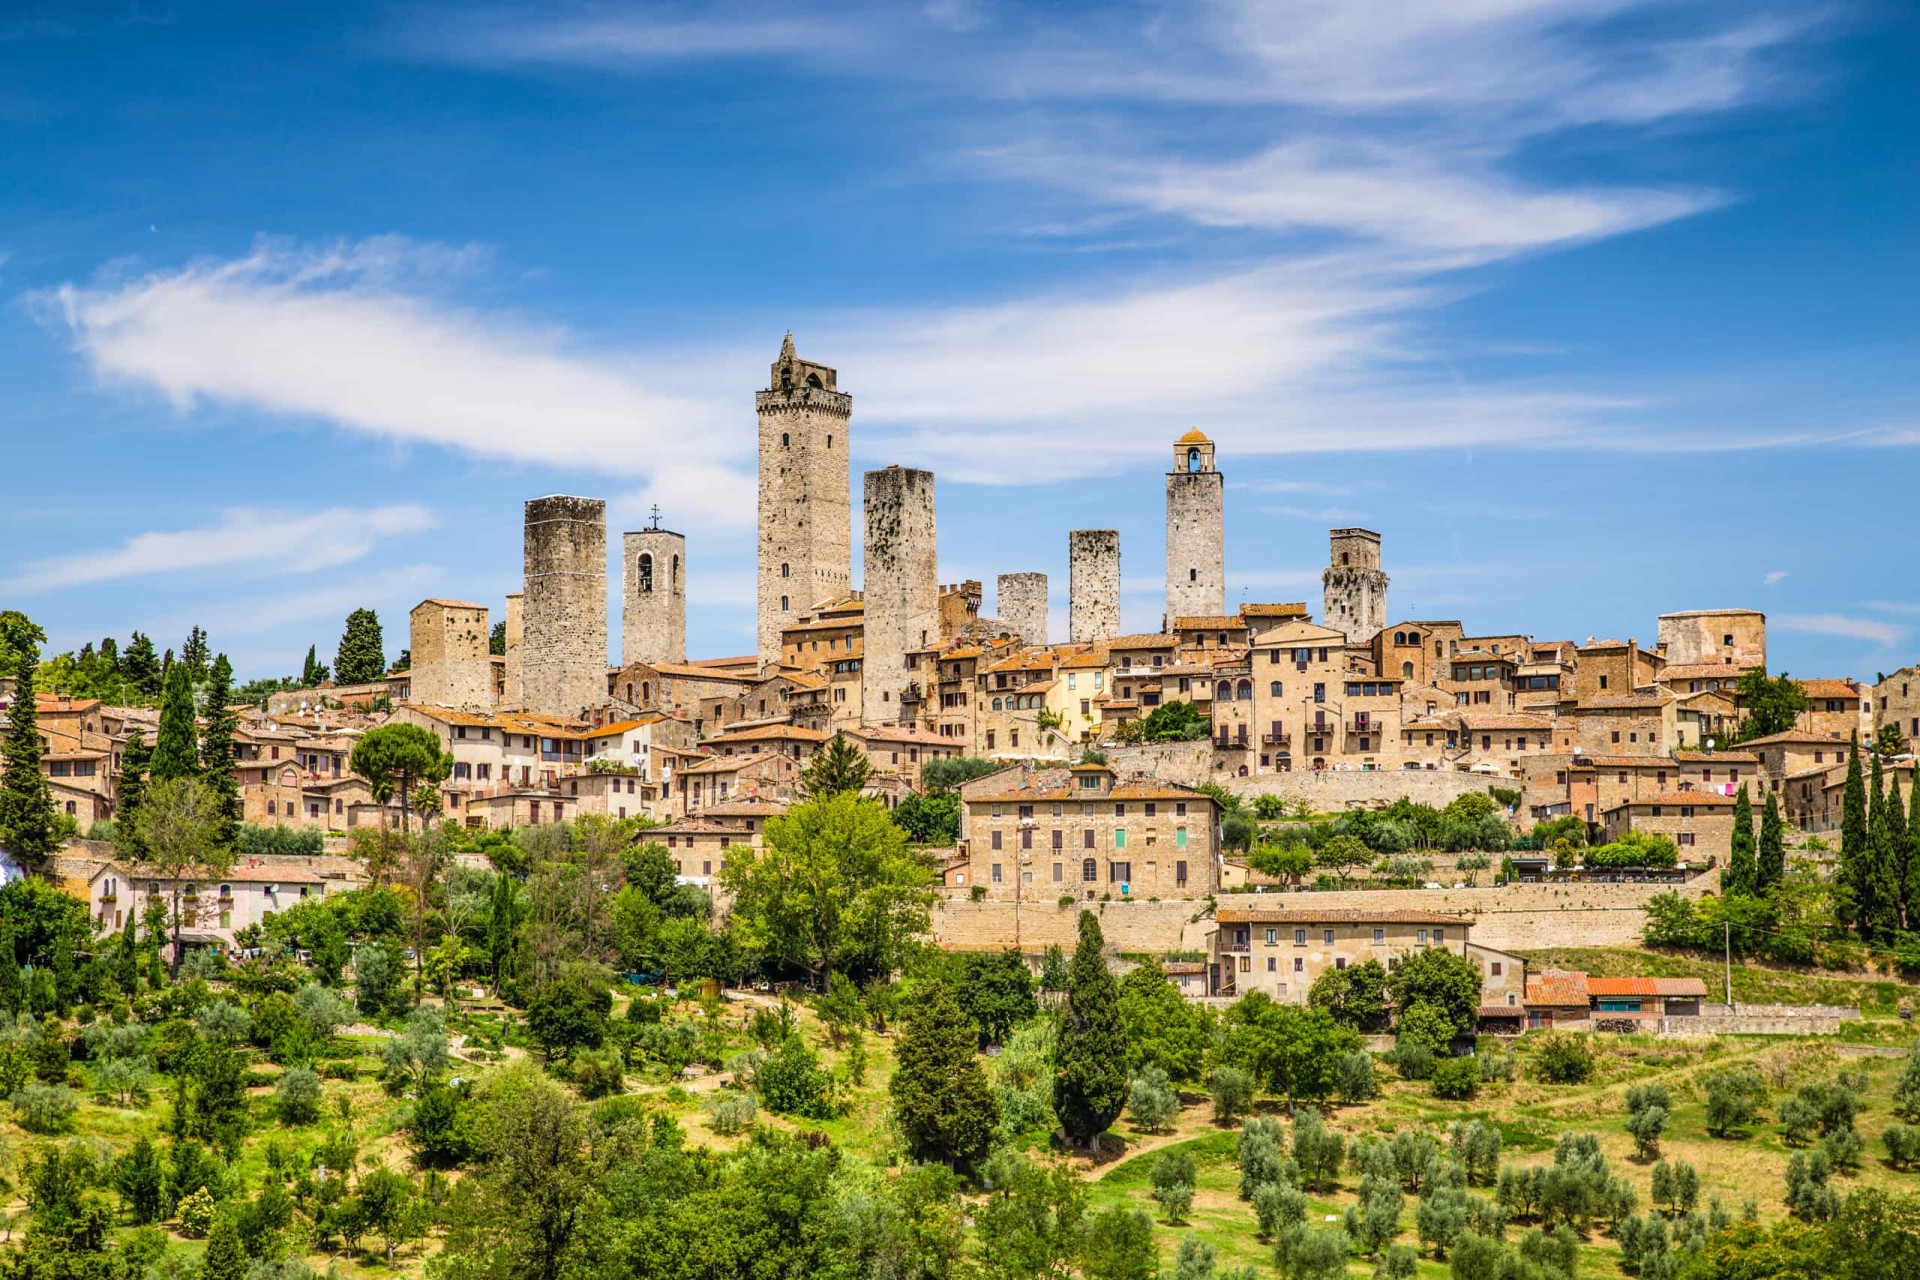 <p>Picture-perfect San Gimignano is the epitome of a Tuscan hill town. Known as the "Town of Fine Towers," the destination is famous for its medieval architecture.</p><p>You may also like:<a href="https://www.starsinsider.com/n/88747?utm_source=msn.com&utm_medium=display&utm_campaign=referral_description&utm_content=481361v4en-en_selected"> These surreal images might look fake, but they are actually completely real</a></p>